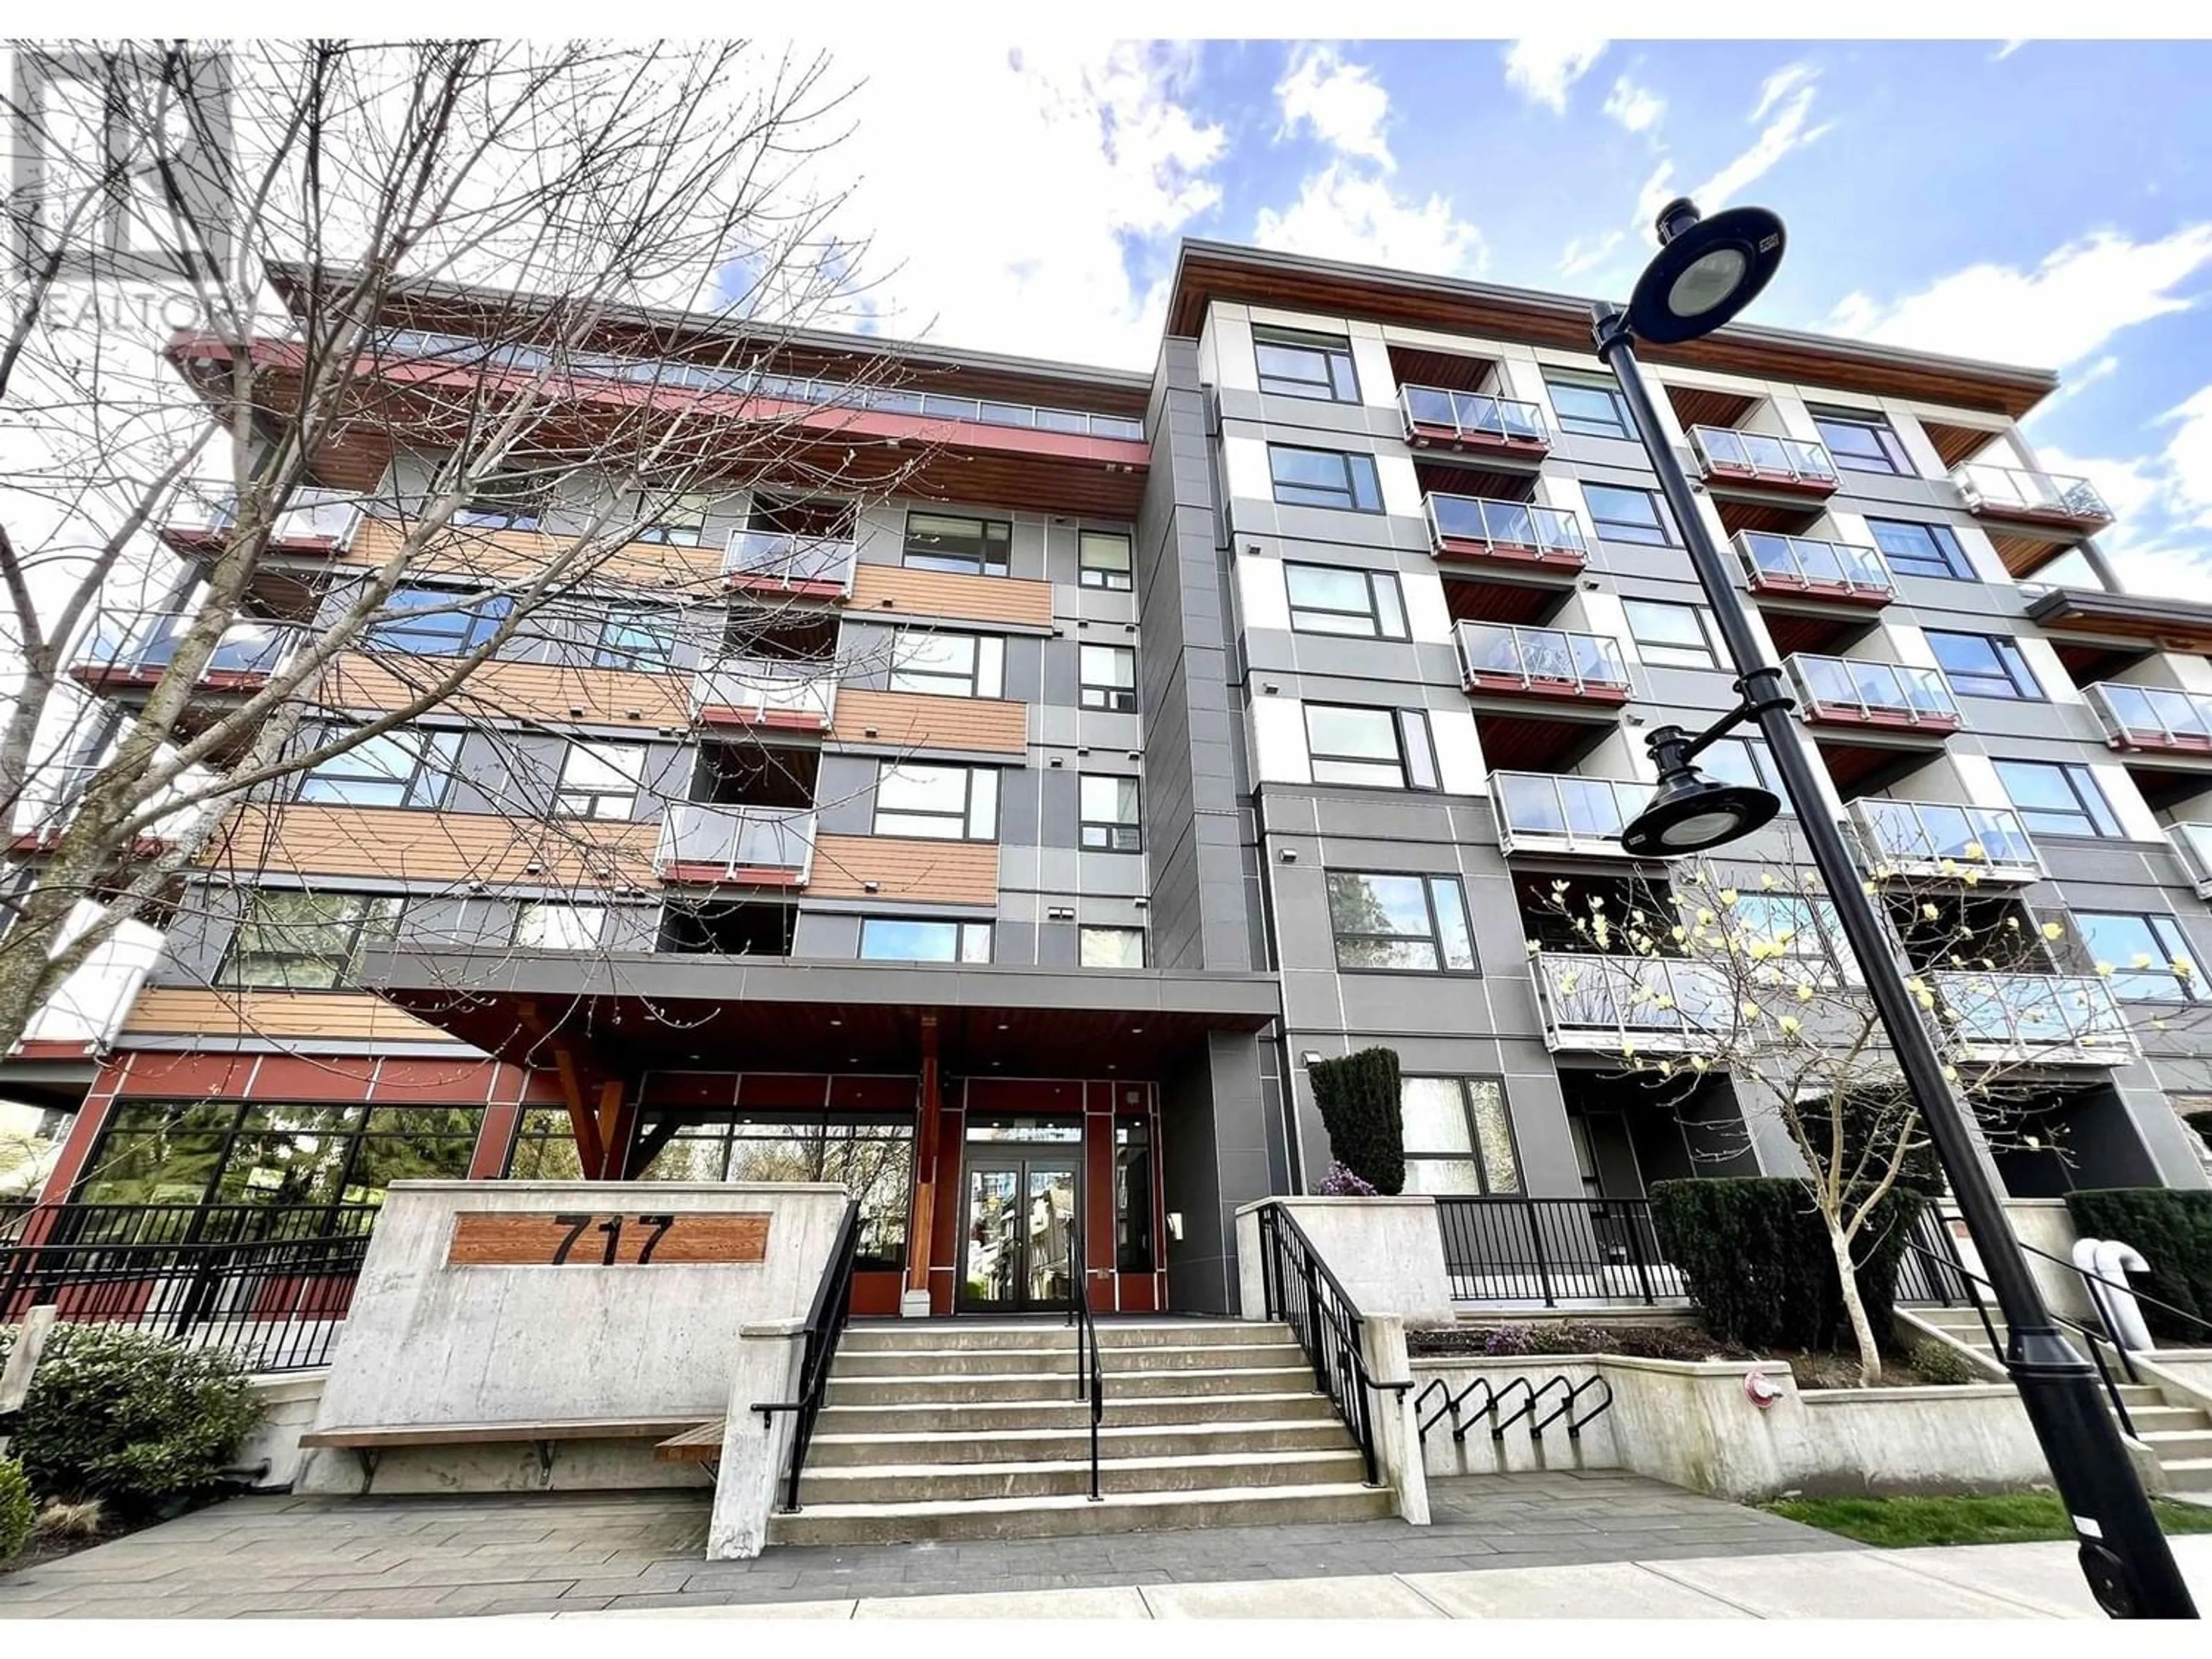 A pic from exterior of the house or condo for 212 717 BRESLAY STREET, Coquitlam British Columbia V3J0J3